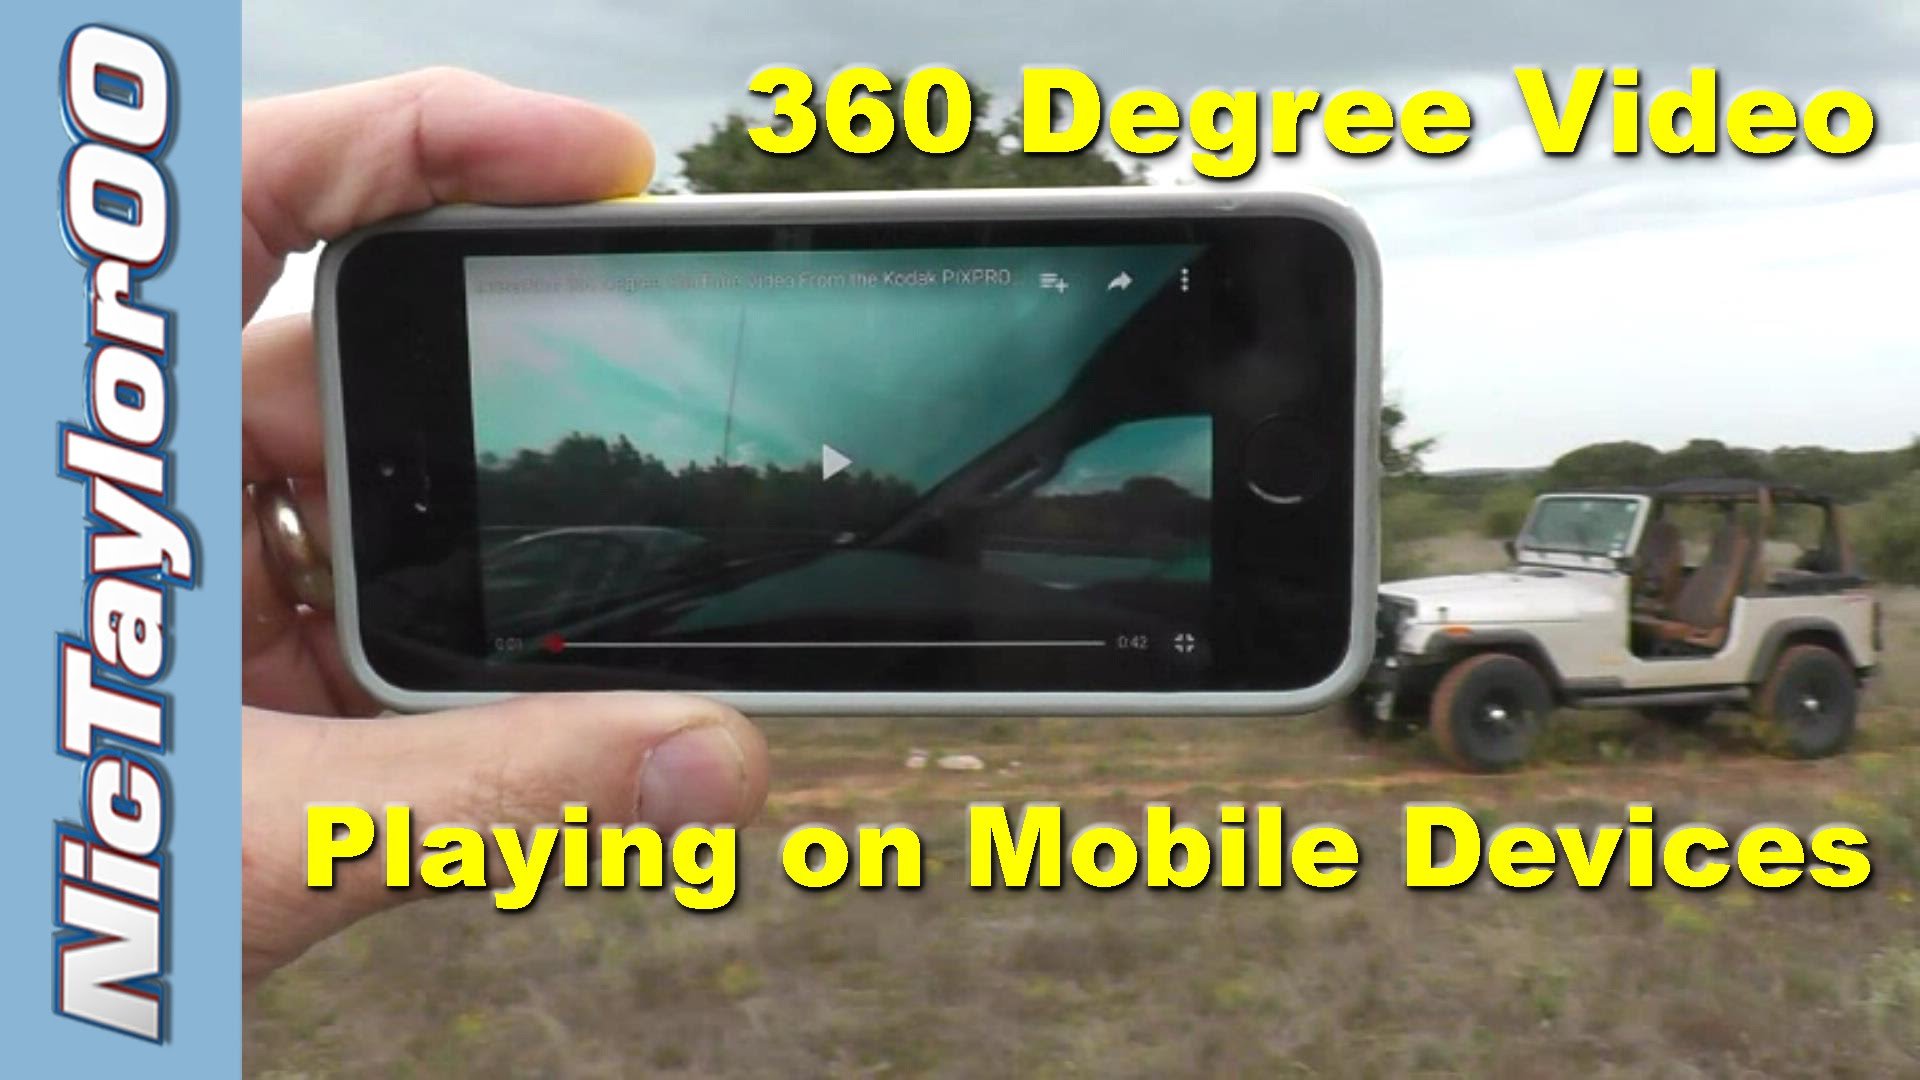 360 Degree Video as Seen on Your Phone, Tablet or Mobile Device